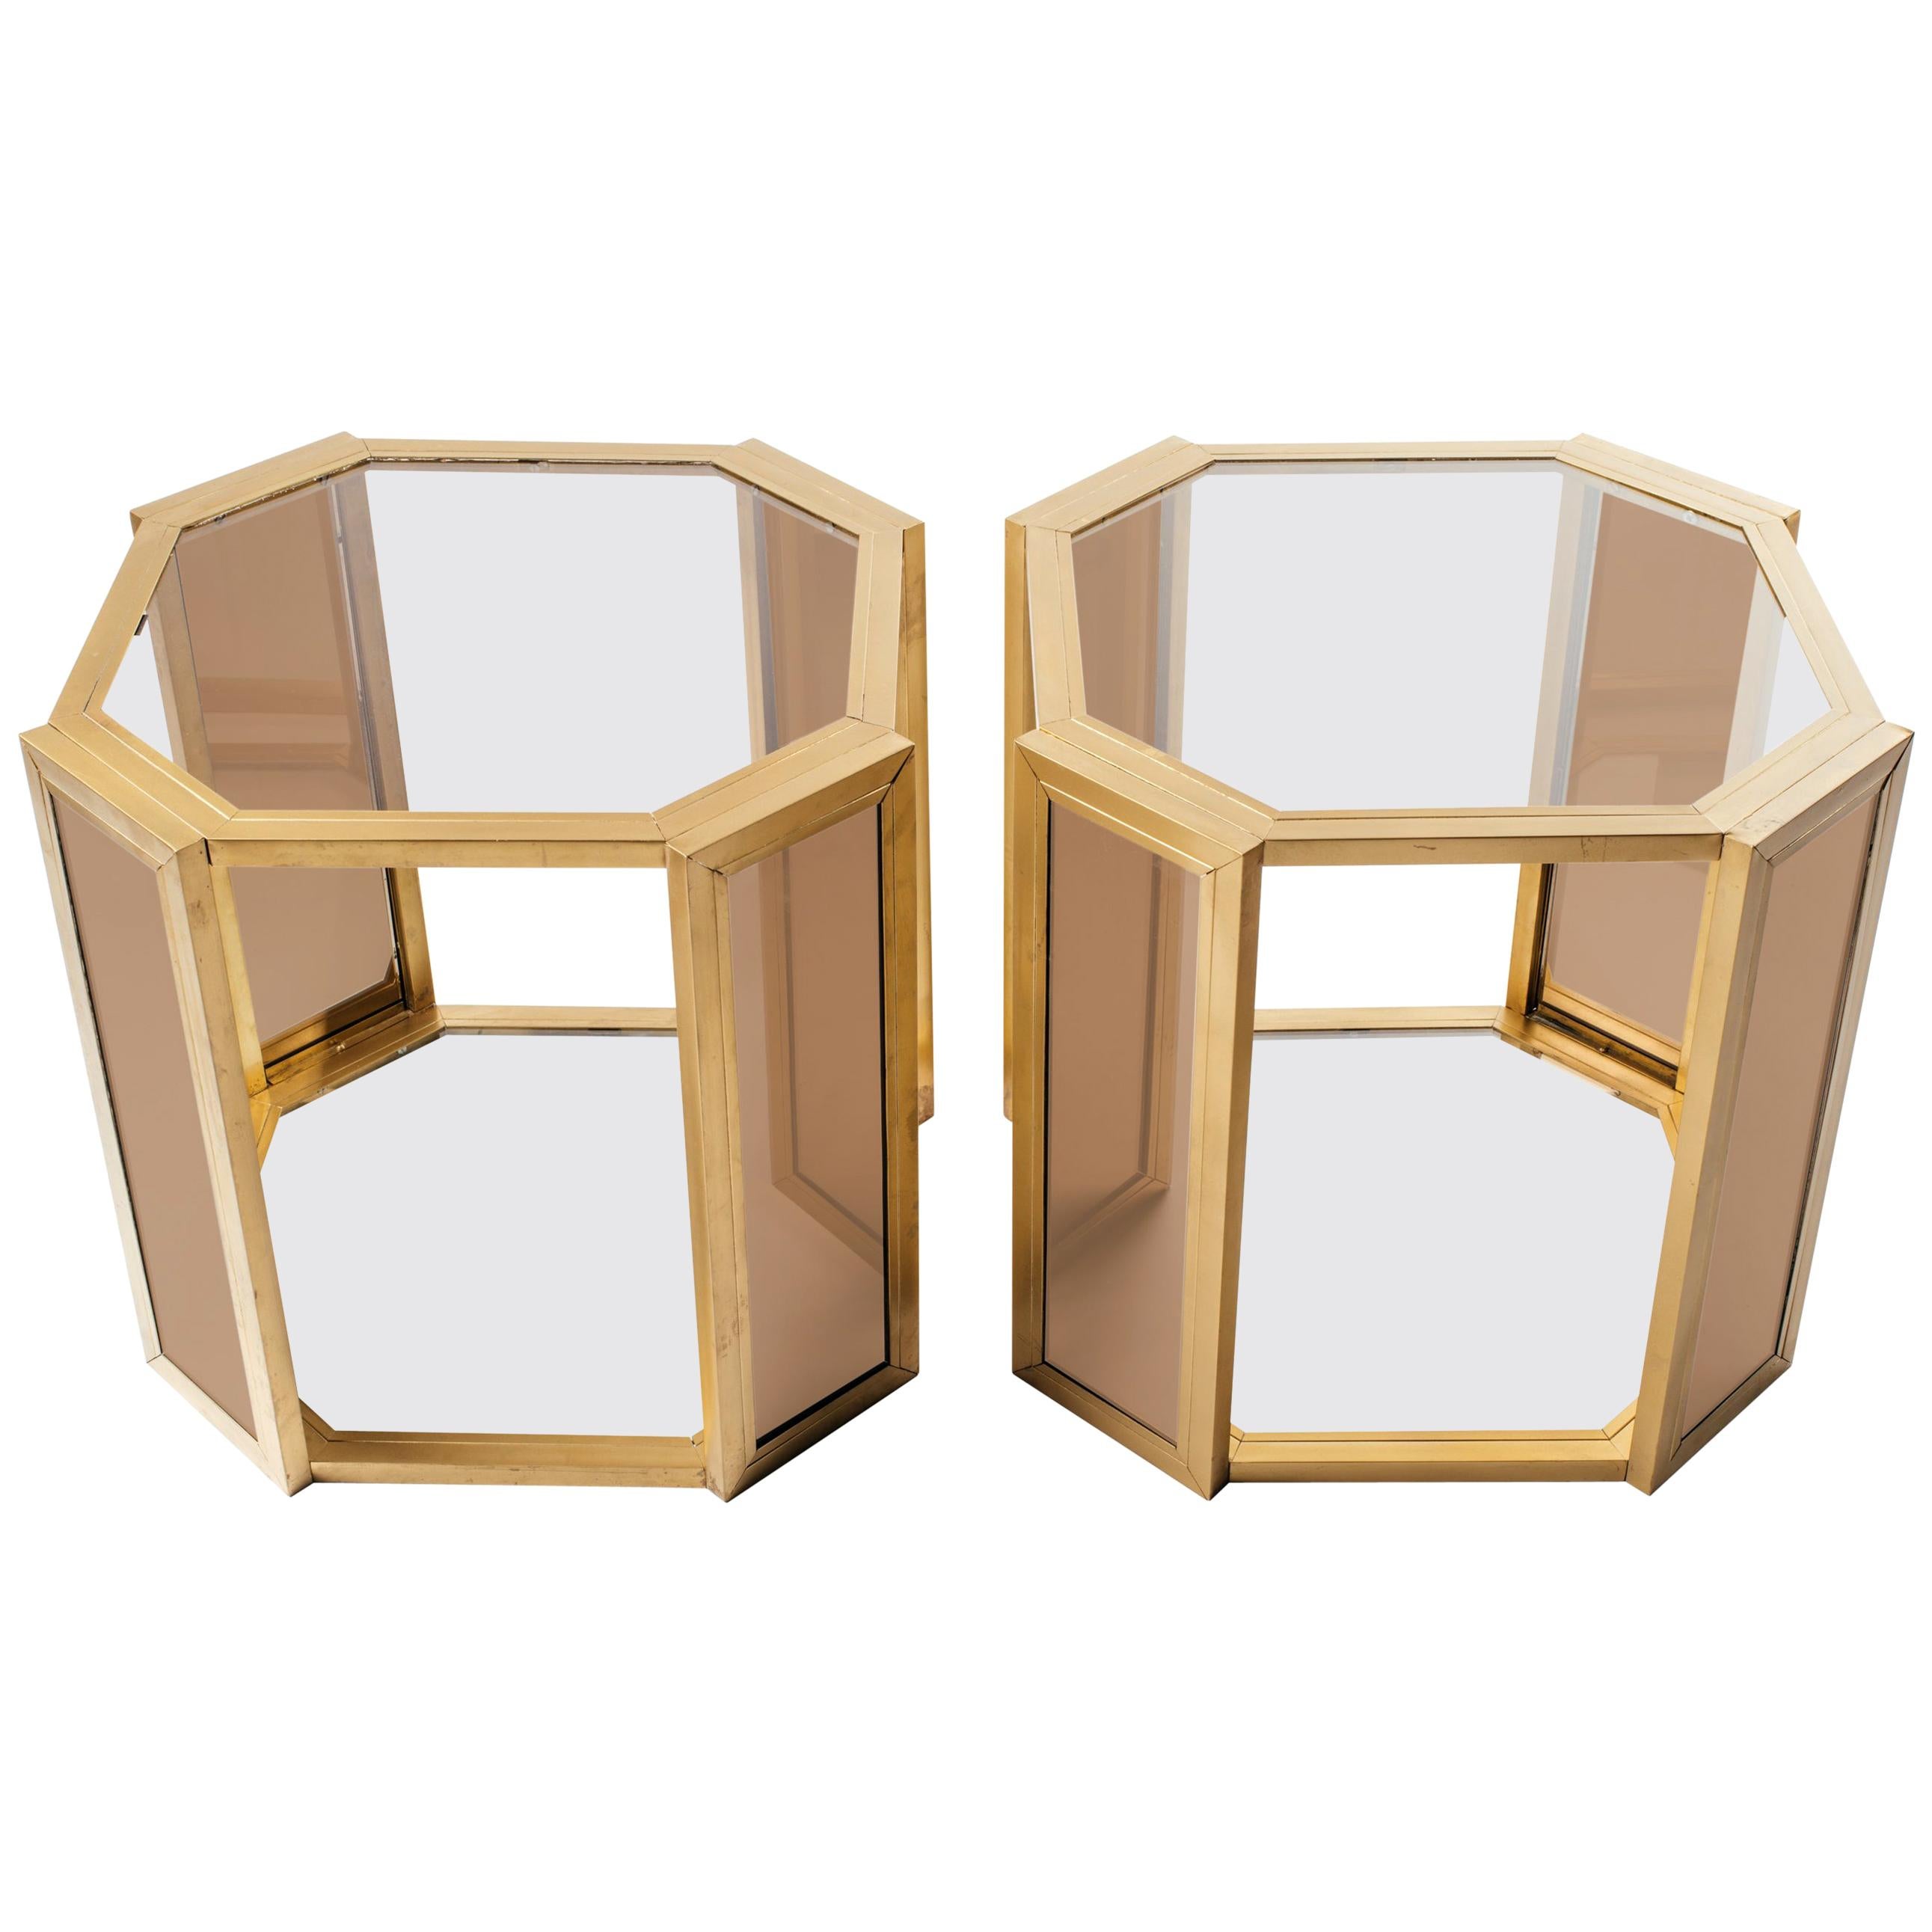 Pair of Hexagon Two Tier Side Tables in Brass and Smoked Glass, c. 1970s For Sale